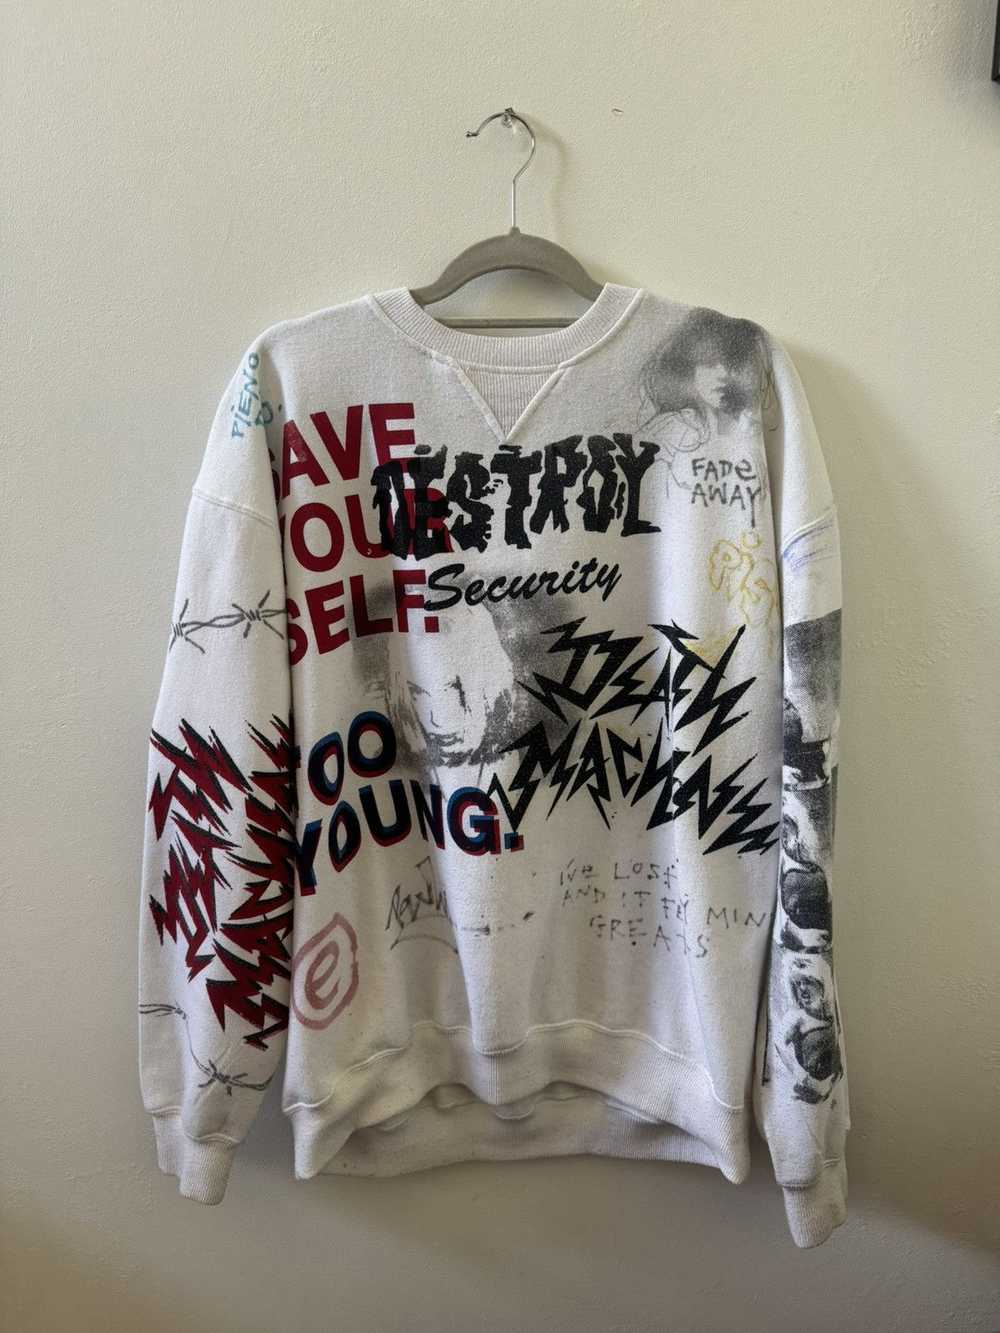 Asap Rocky × Vlone Himumimdead “Pauly” 1 of1 crew… - image 2